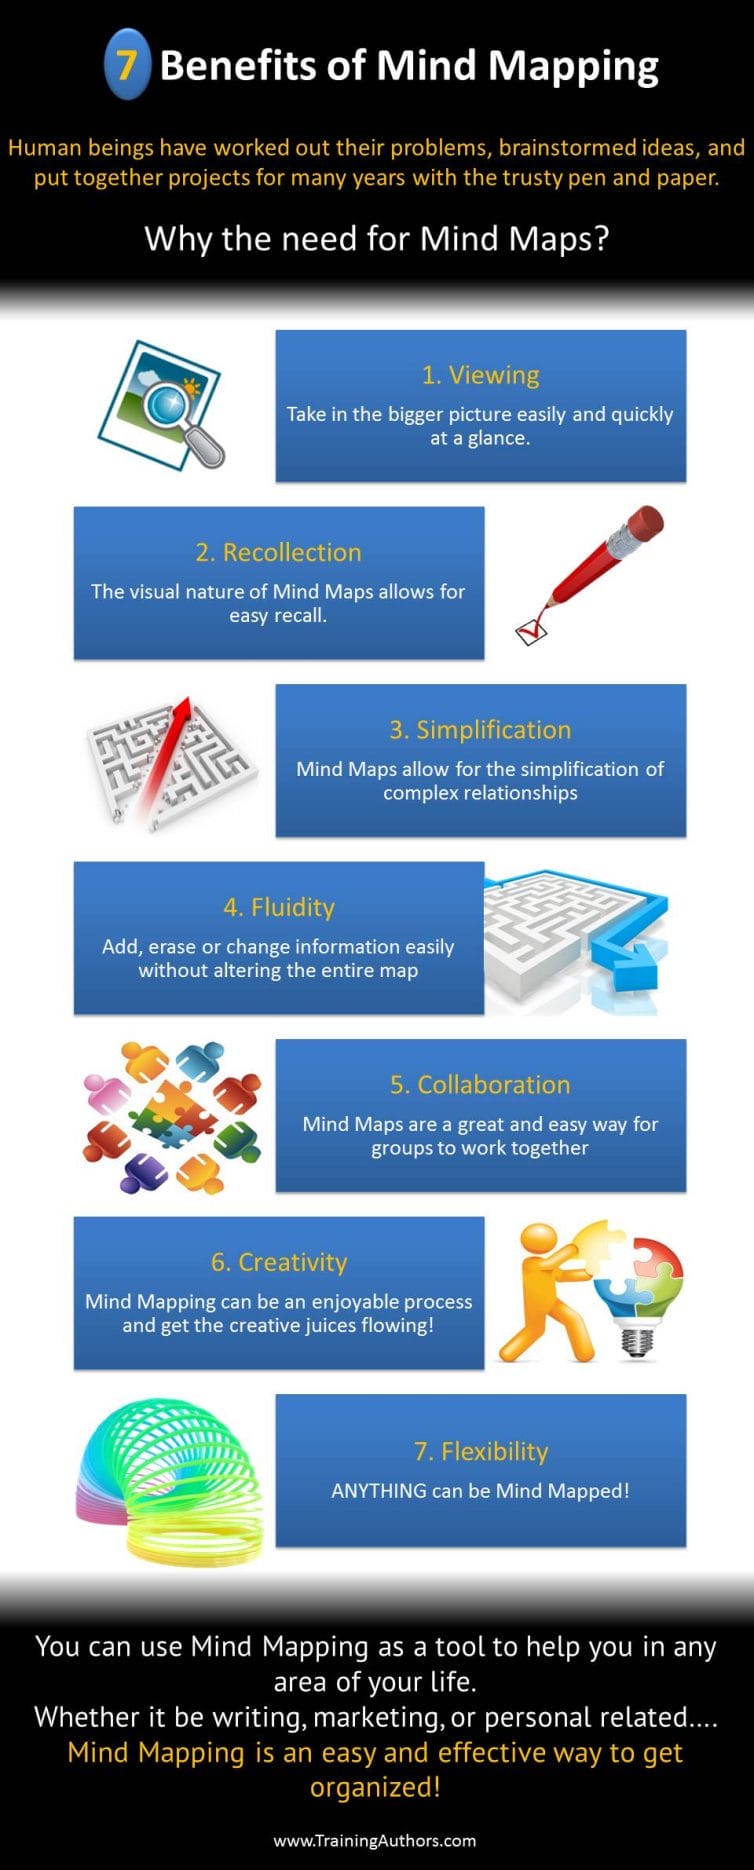 The 7 Benefits of Mind Mapping